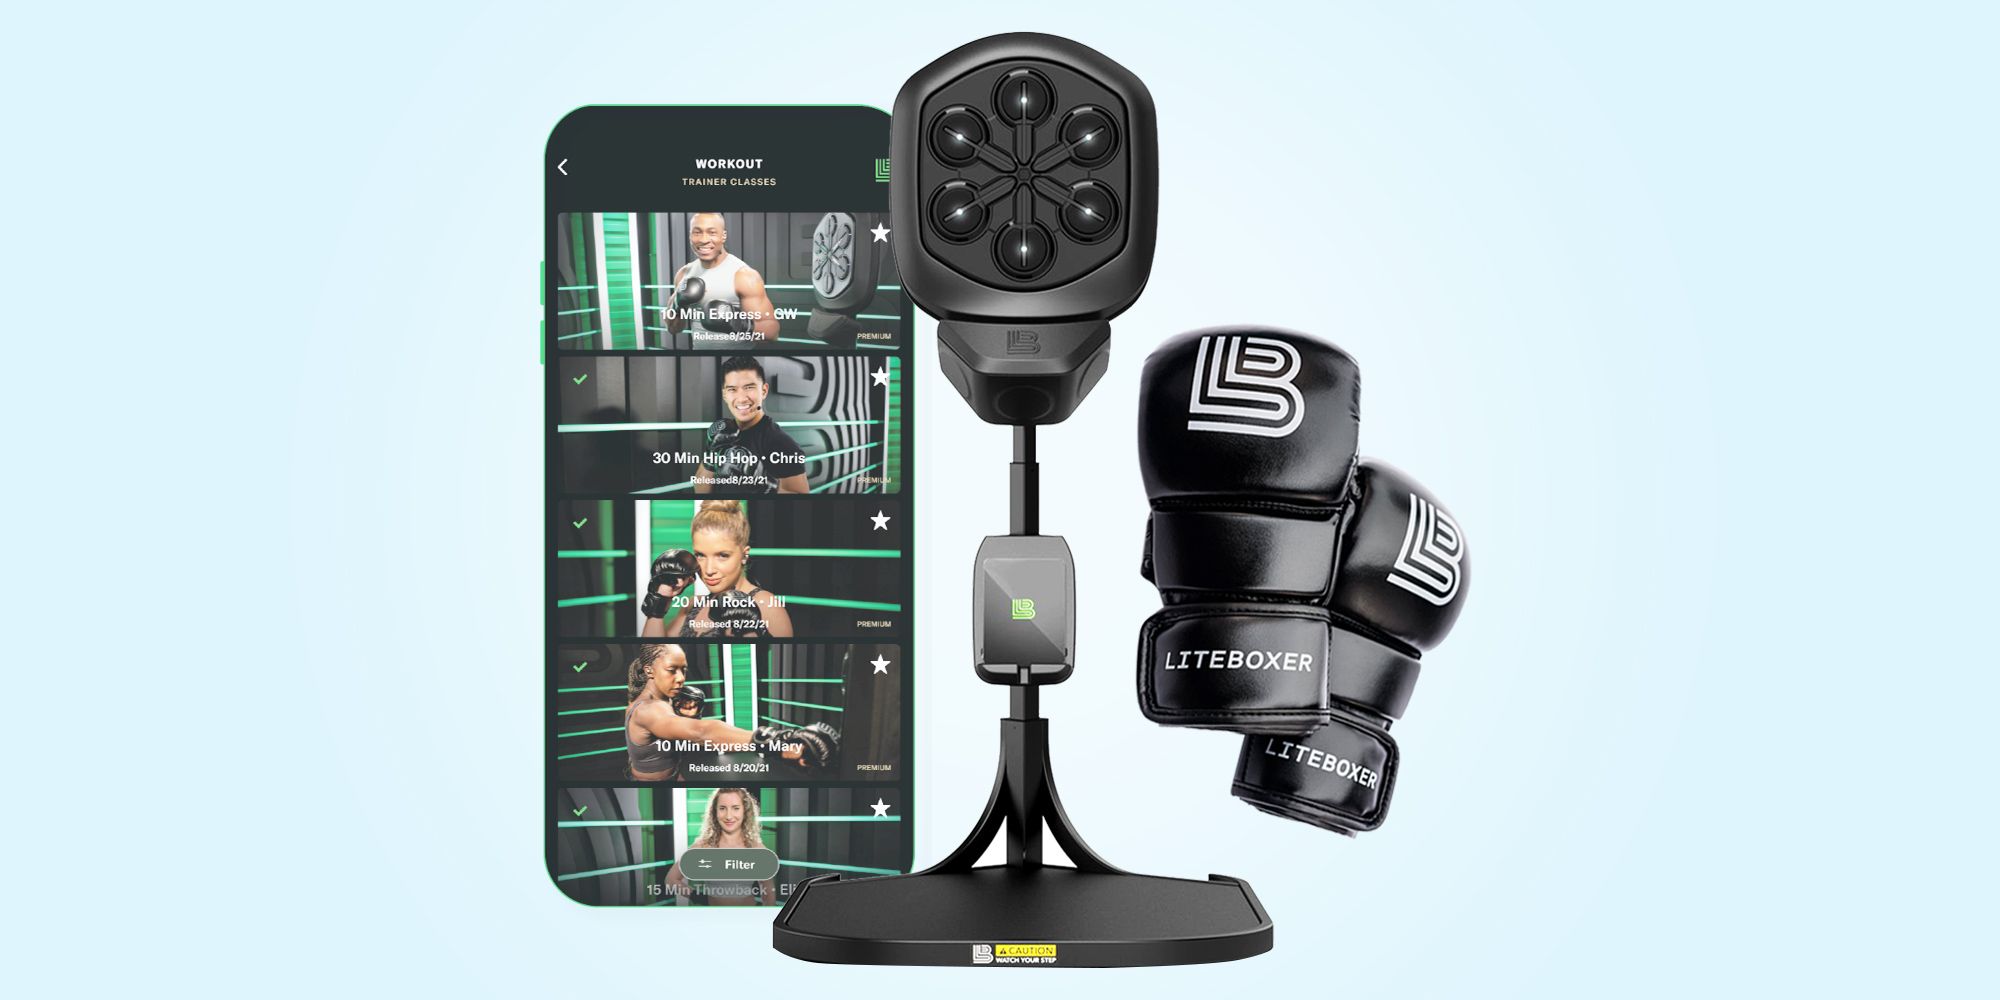 Liteboxer review: Get a fun home boxing workout with this smart